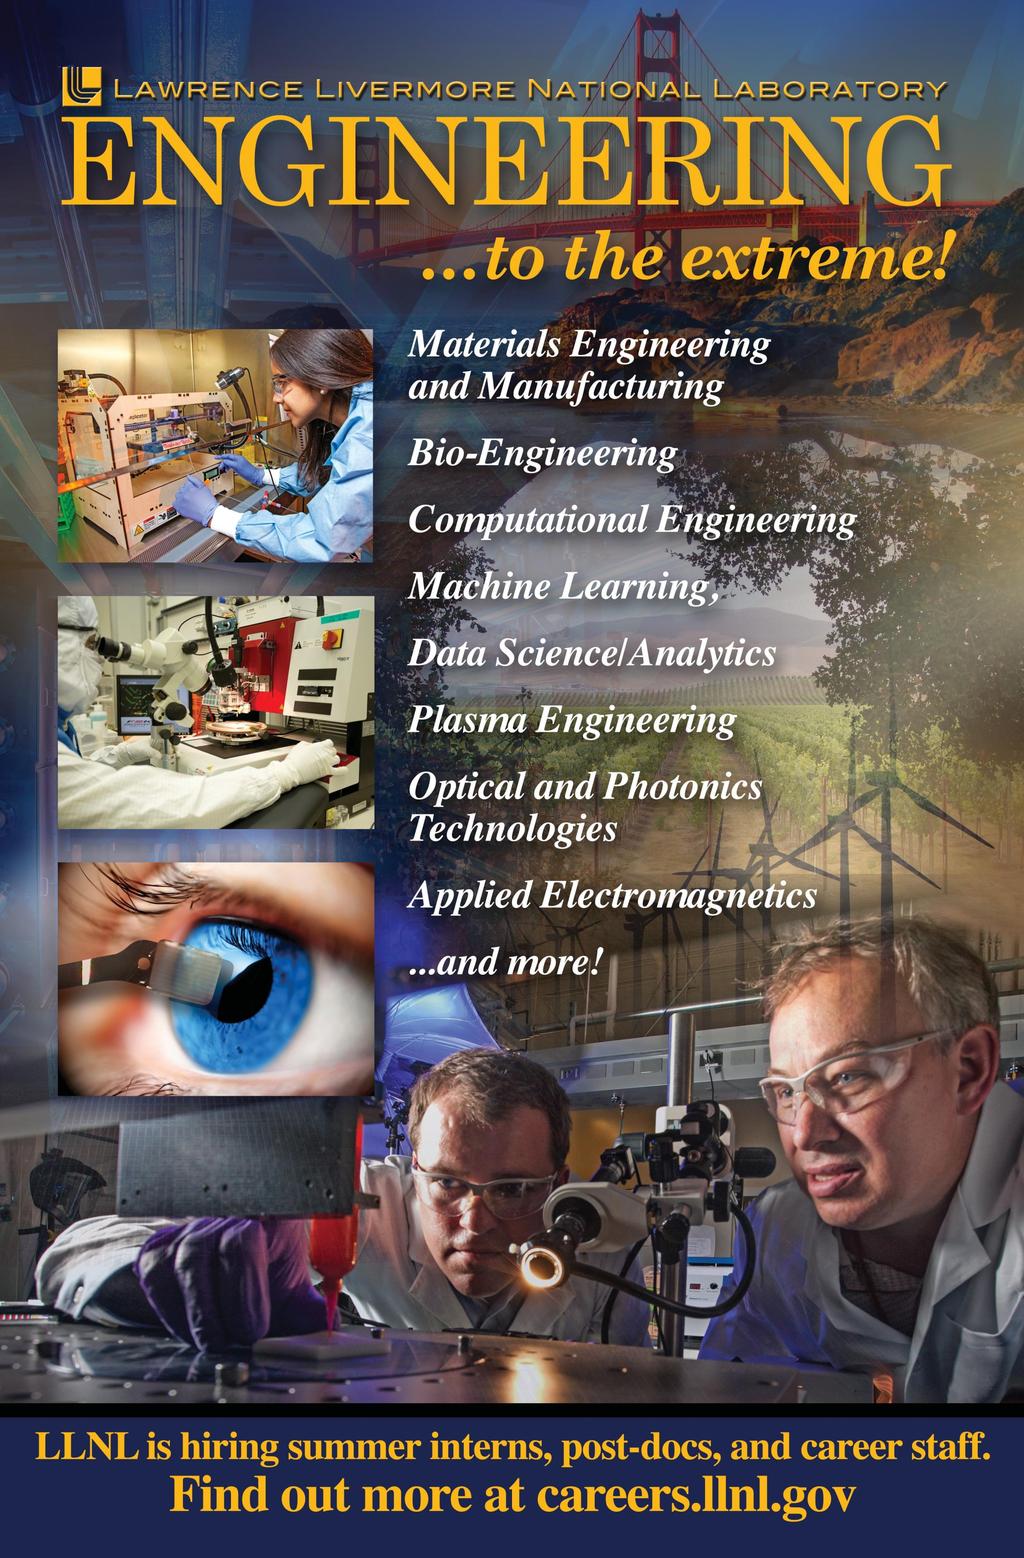 Find out more about LLNL s Engineering